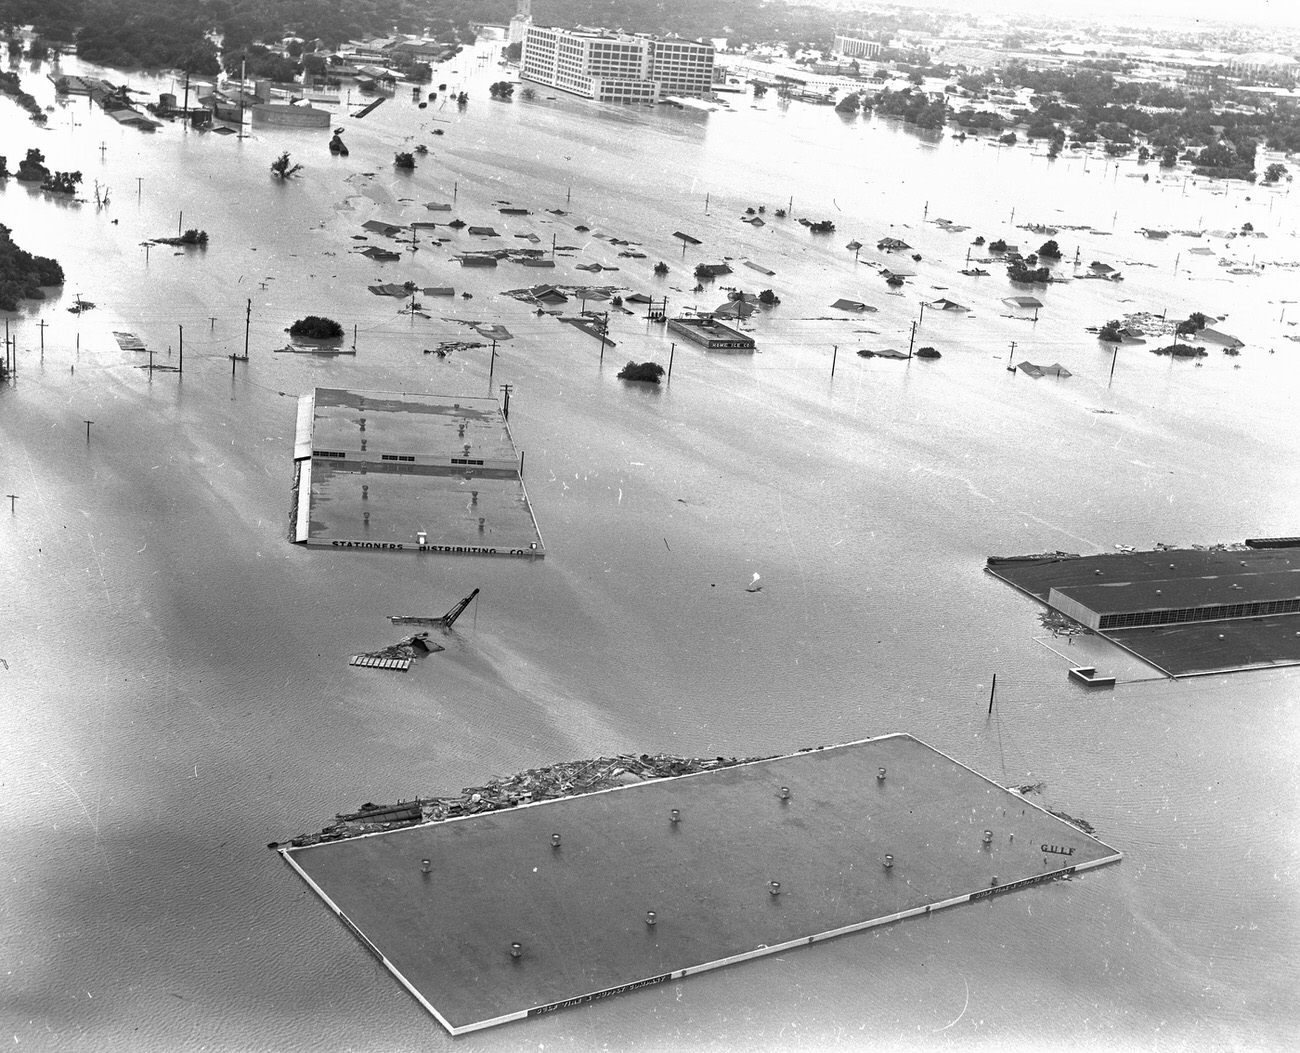 Fort Worth, Texas, flood of 1949, showing 7th Street under water.